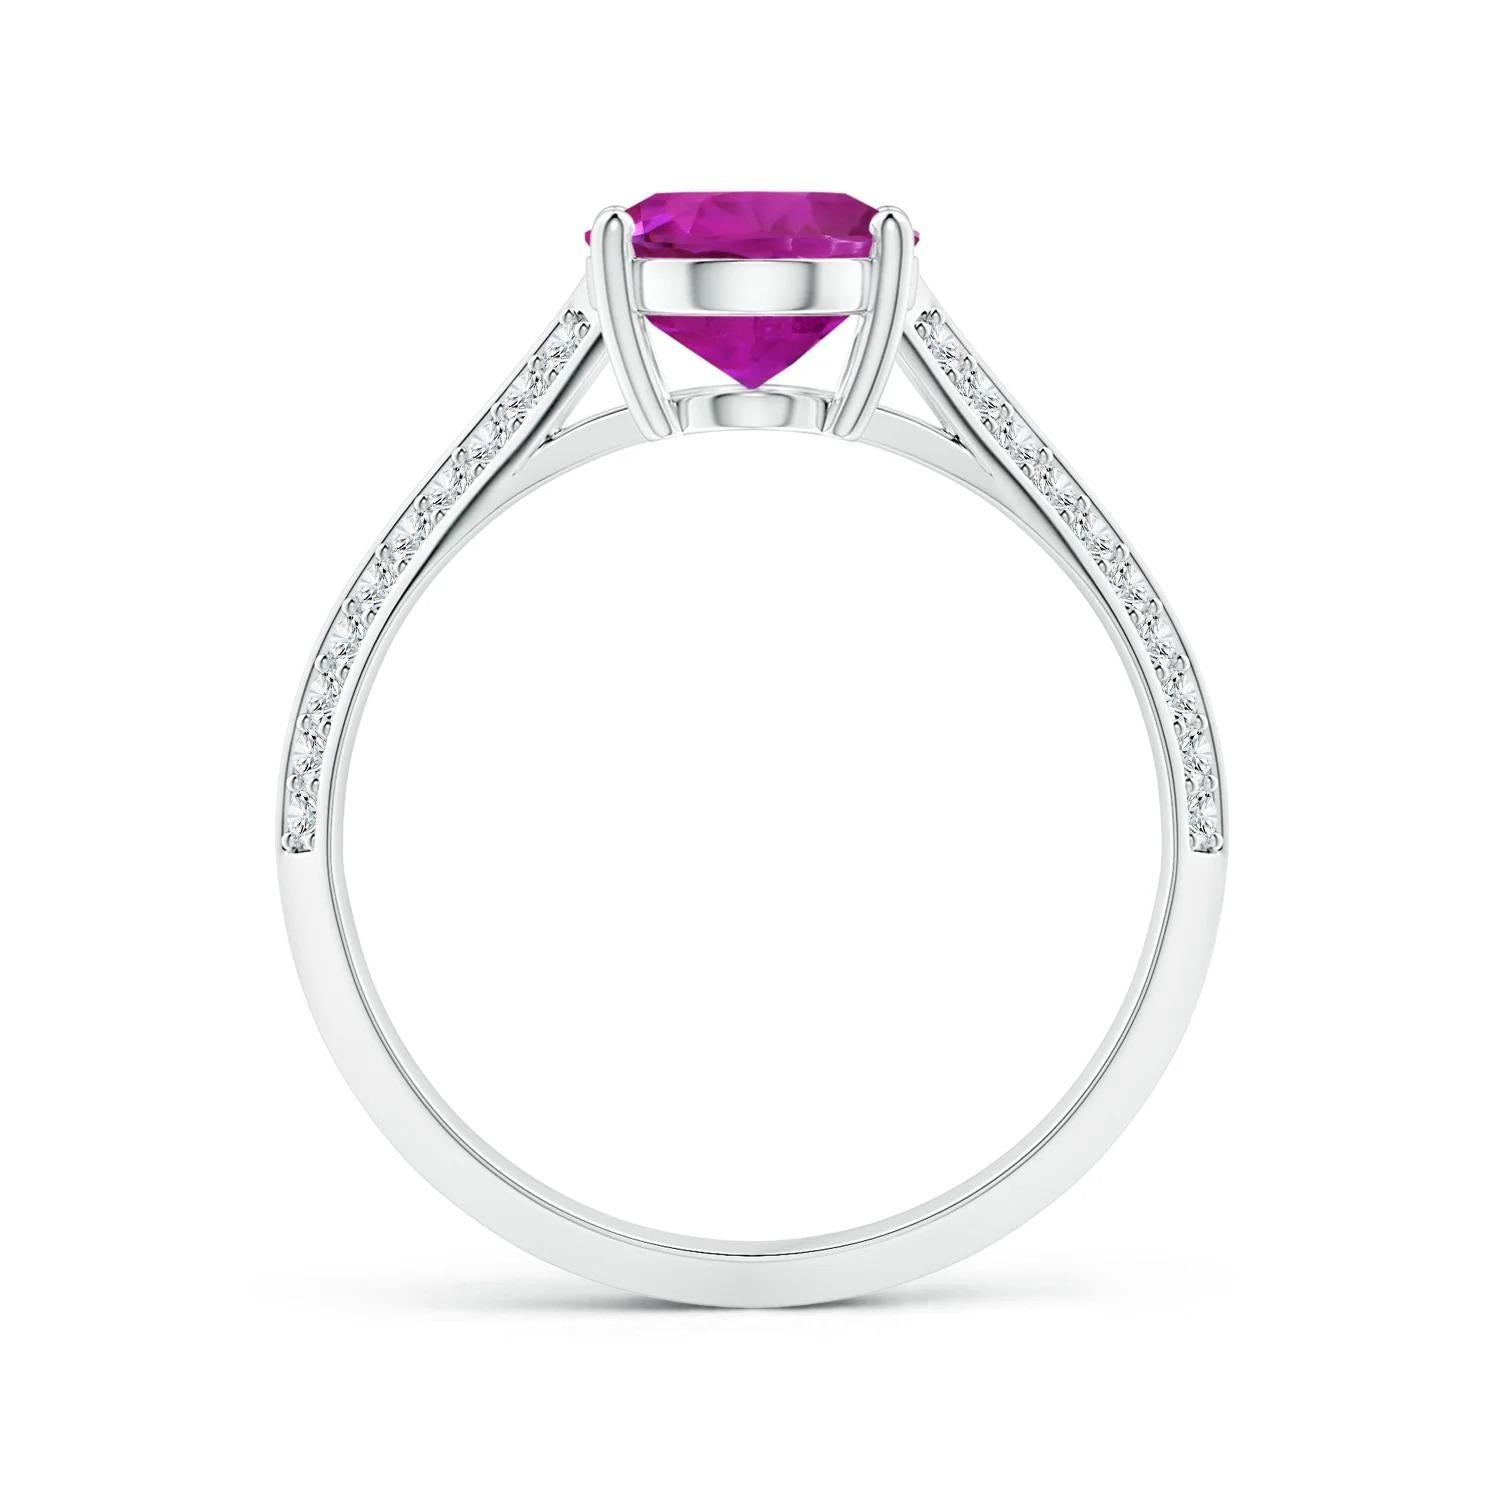 For Sale:  GIA Certified Pink Sapphire Knife Edge Ring in White Gold with Diamonds 2